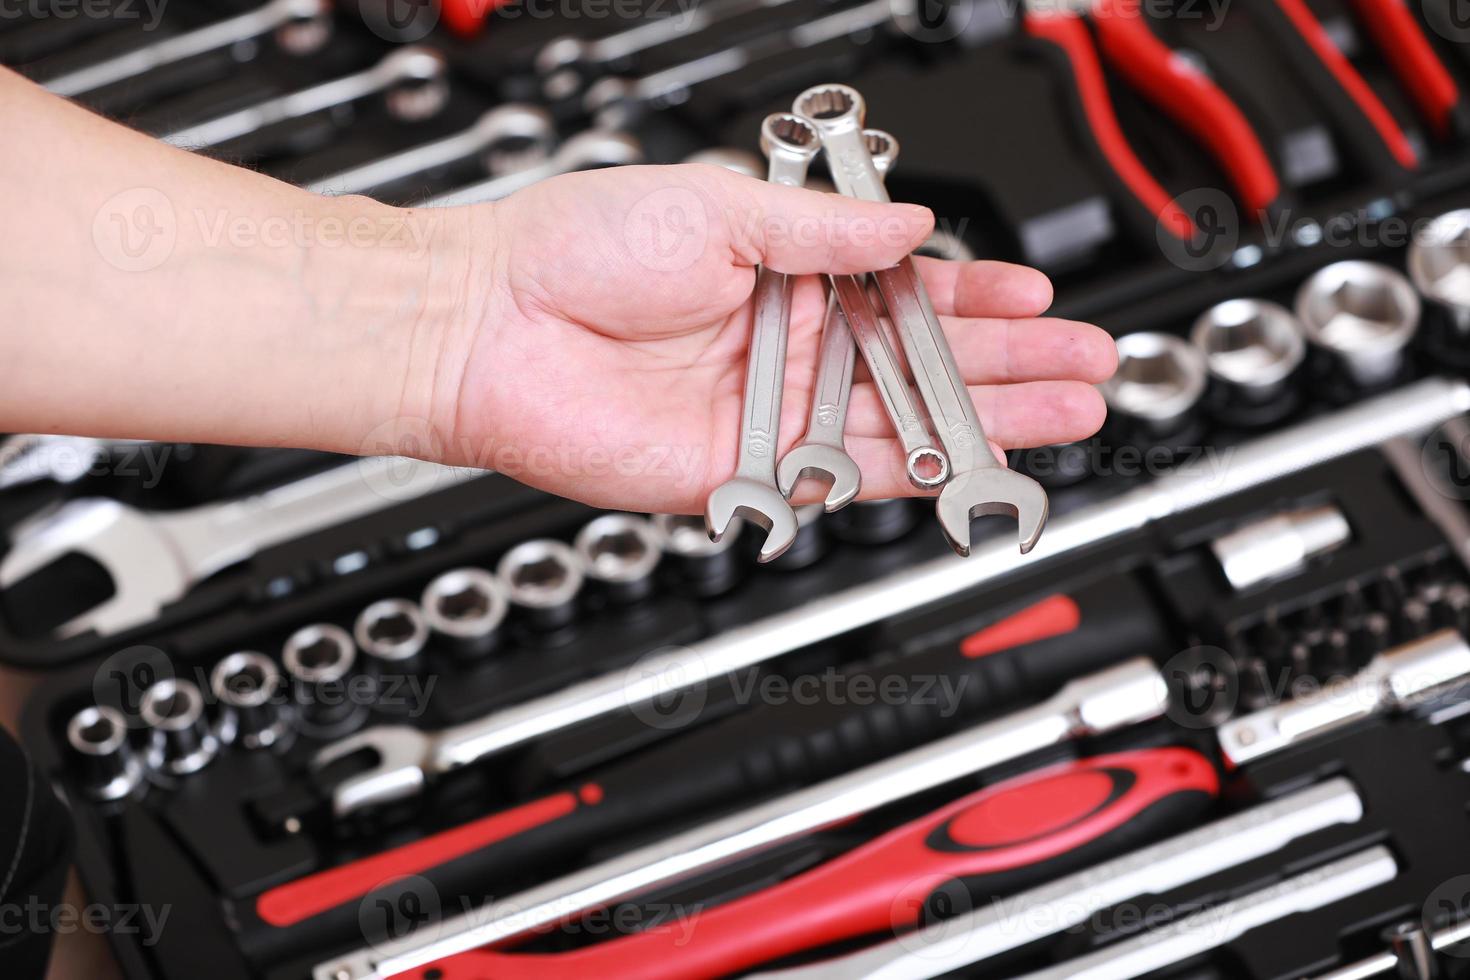 Tool store. Closeup of male hand holding wrenches. Auto repair kit in toolbox. Repairman instruments set. Inside the toolbox there are black-red wrenches, spanners and different nozzles. Closeup. photo